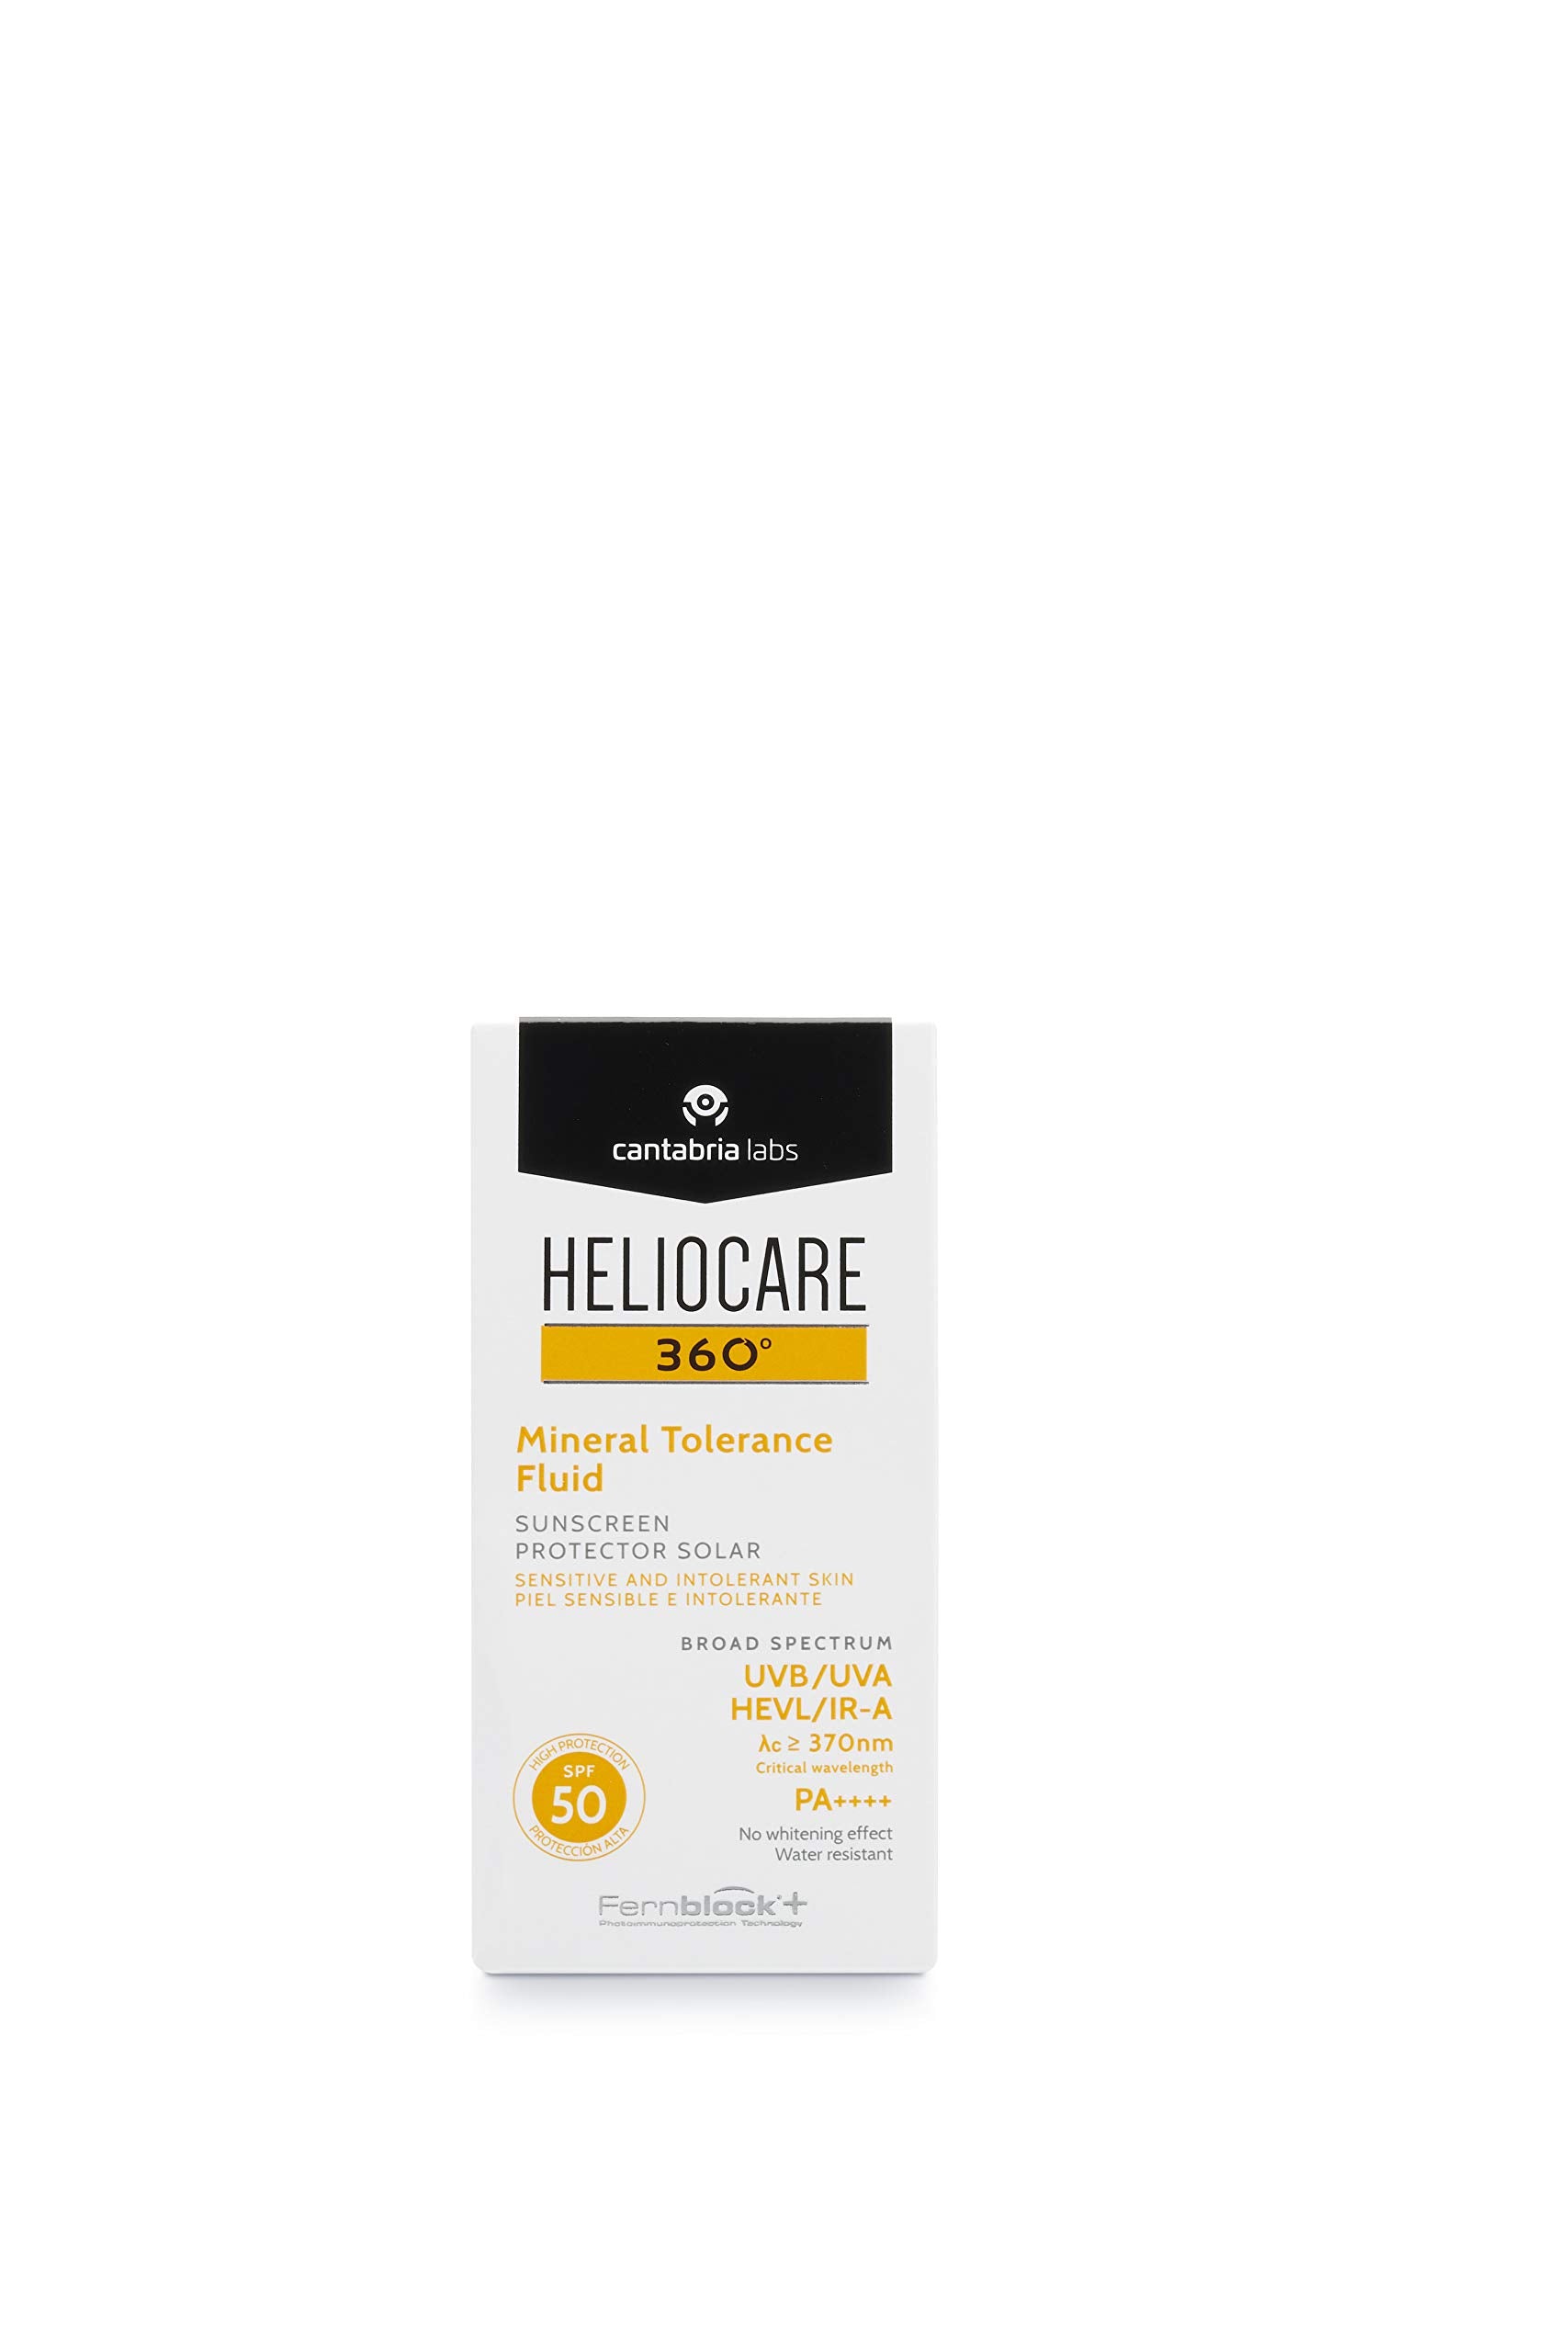 Heliocare 360 Mineral Tolerance Fluid SPF50 50ml / Mineral Sunscreen For Face/Daily UVA UVB Visible Light and infrared-A Hypoallergenic Sun Protection/Silky Transparent Finish